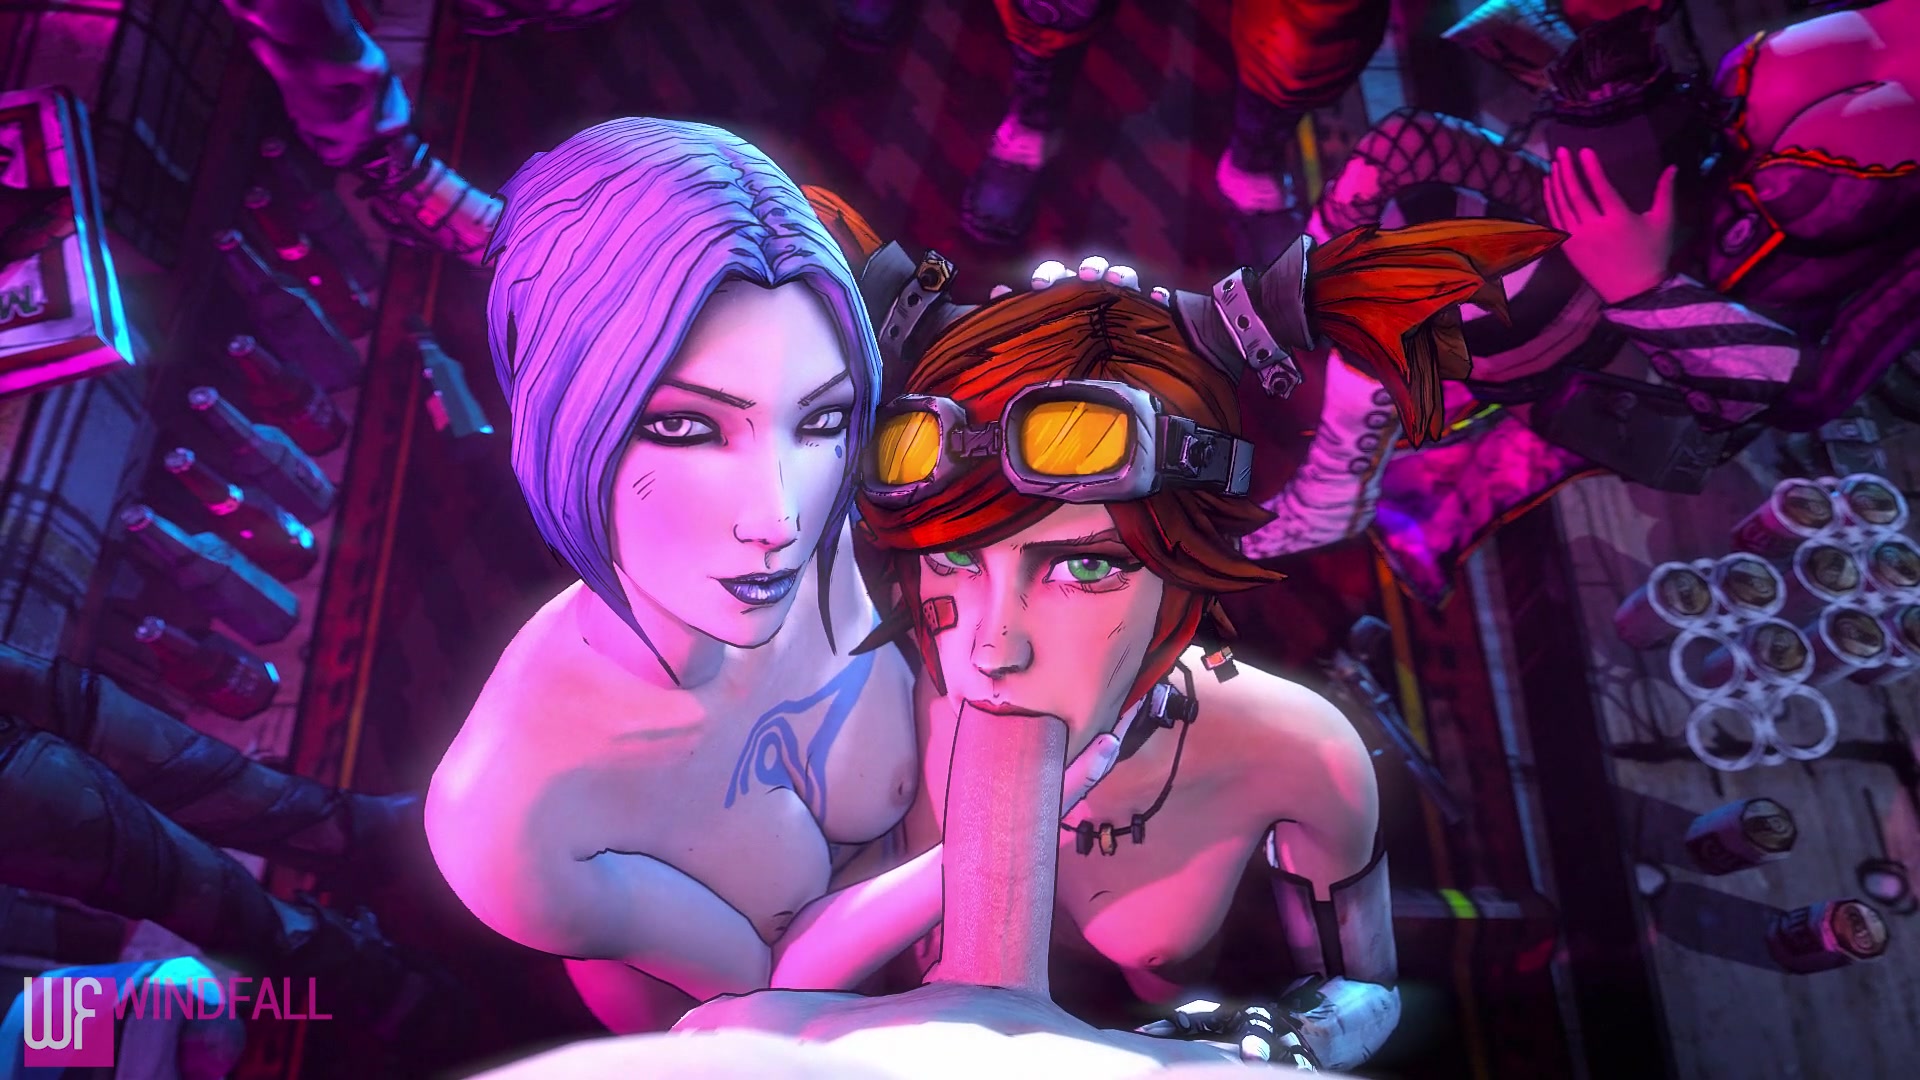 1920px x 1080px - Hot double blowjob / Maya and Gaige from Borderlands at  cartoonvideos24/7.com